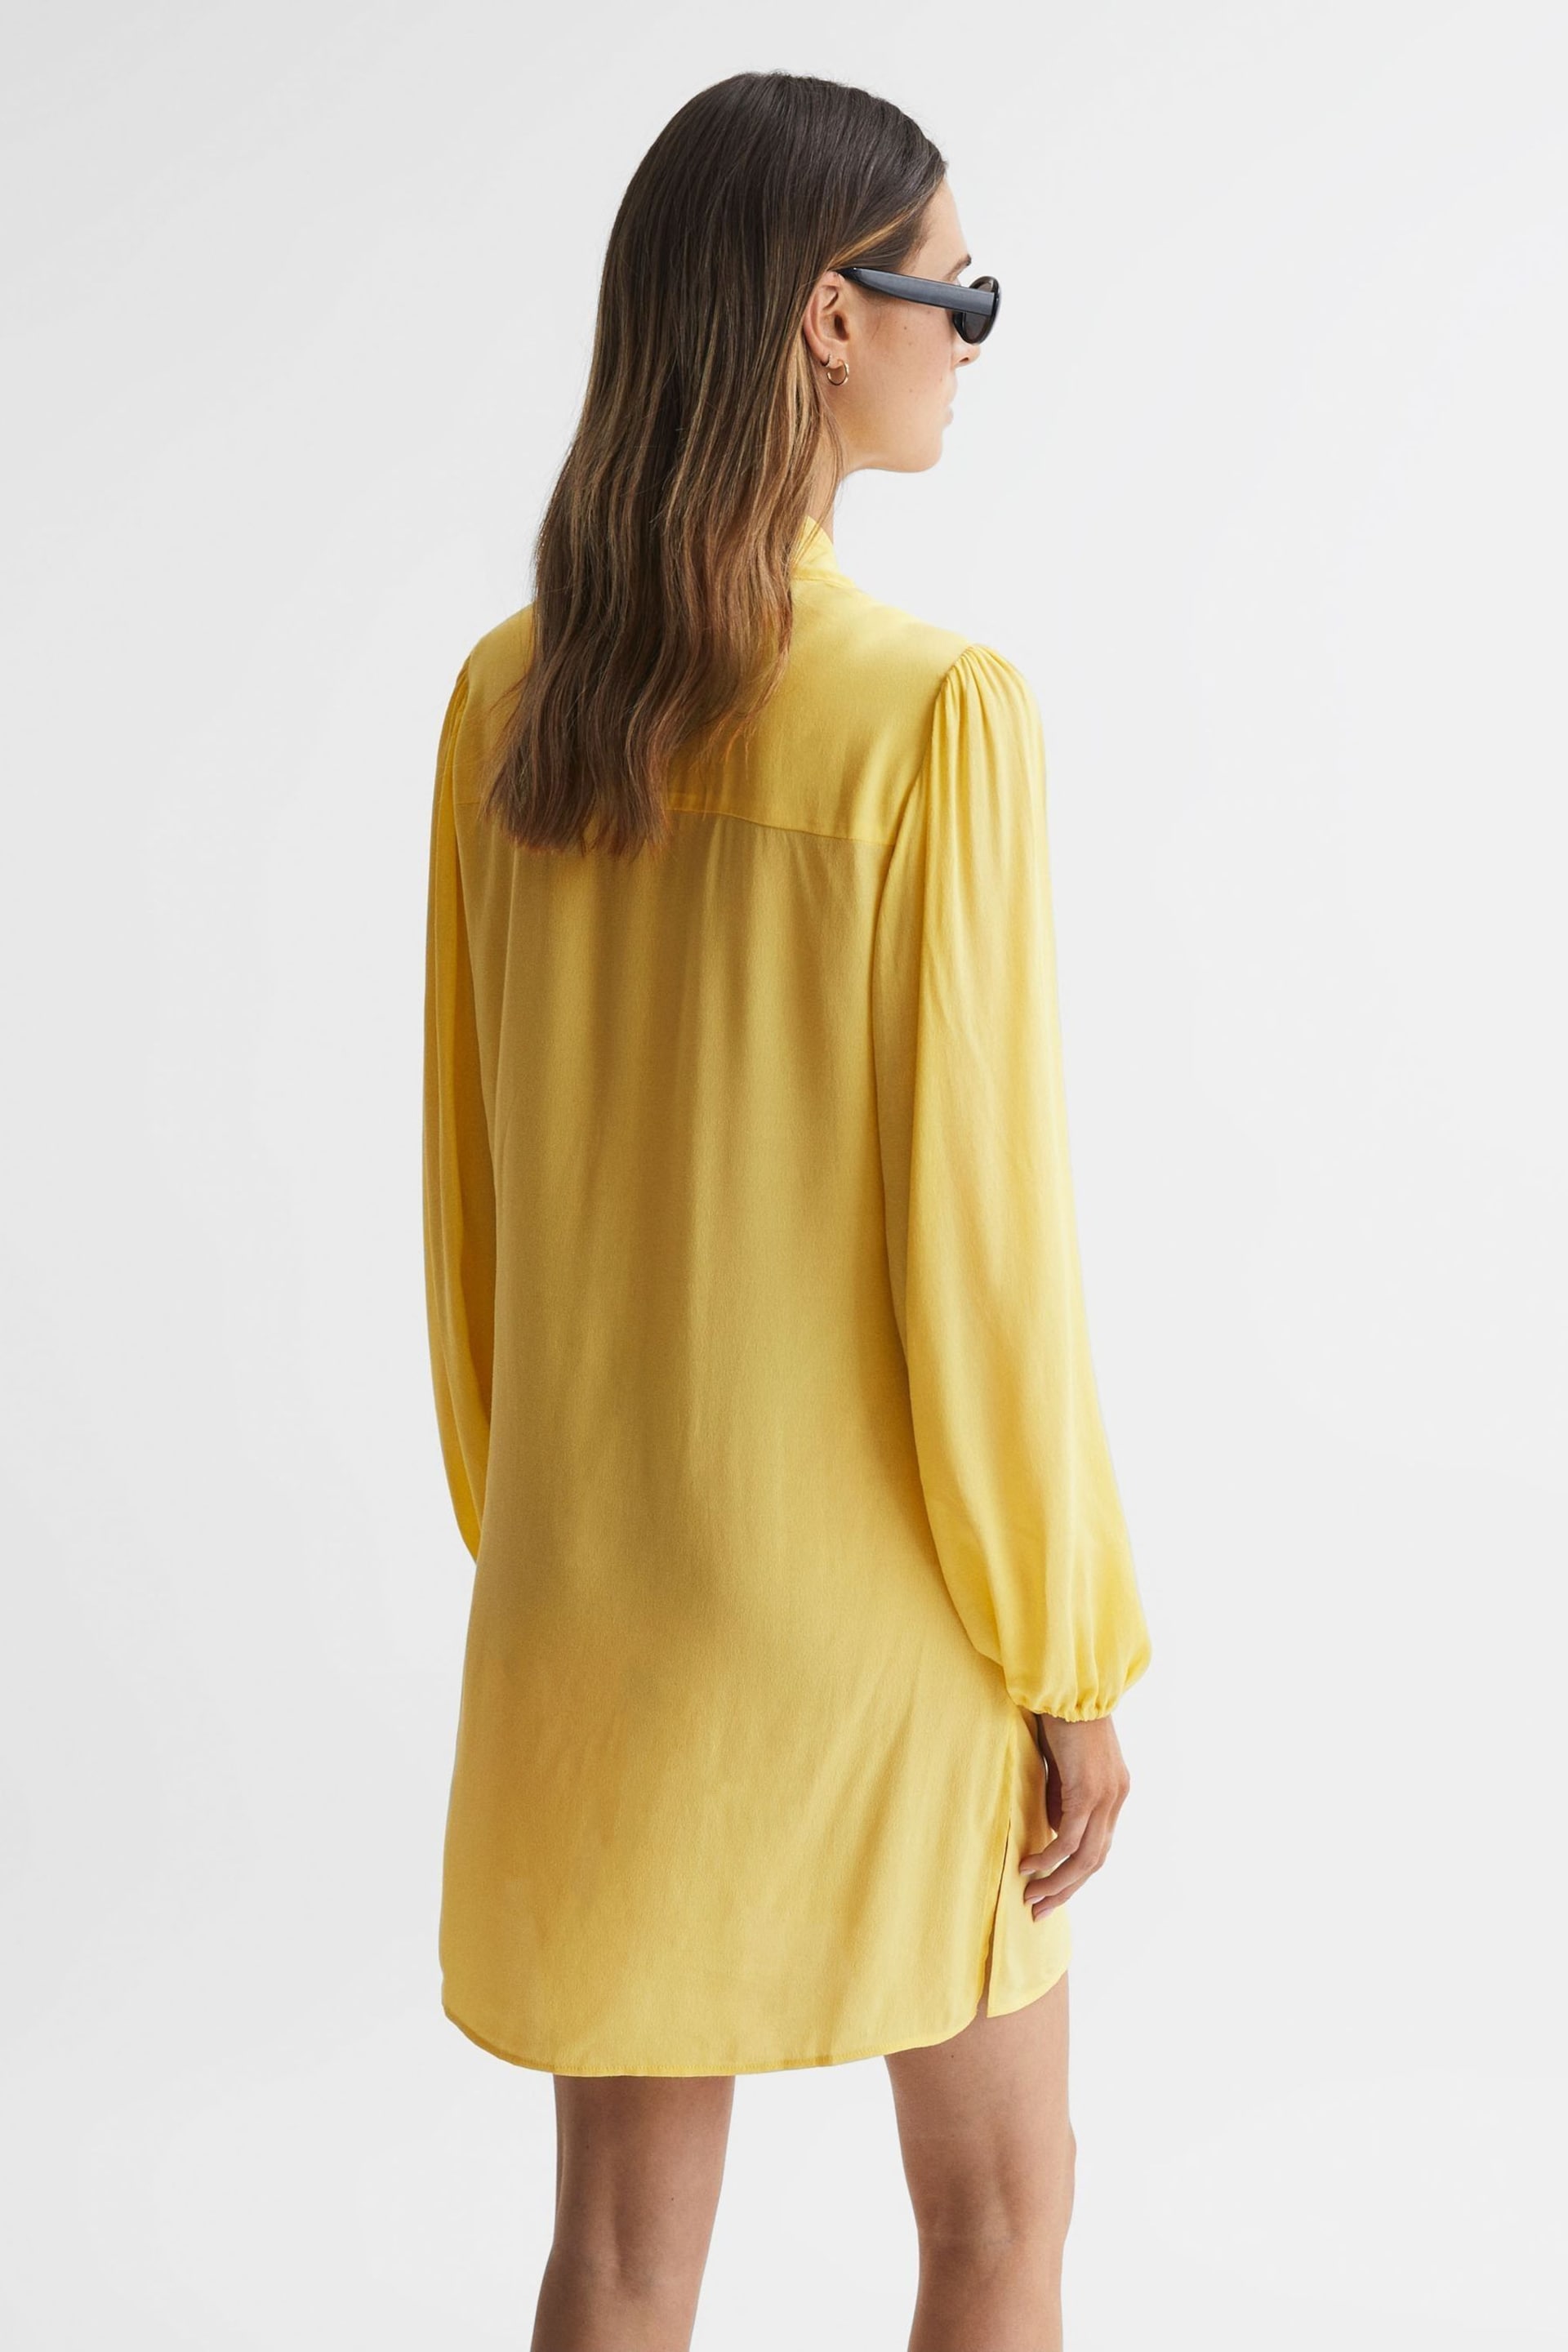 Reiss Yellow Mabel Tie Front Mini Dress - Image 5 of 5